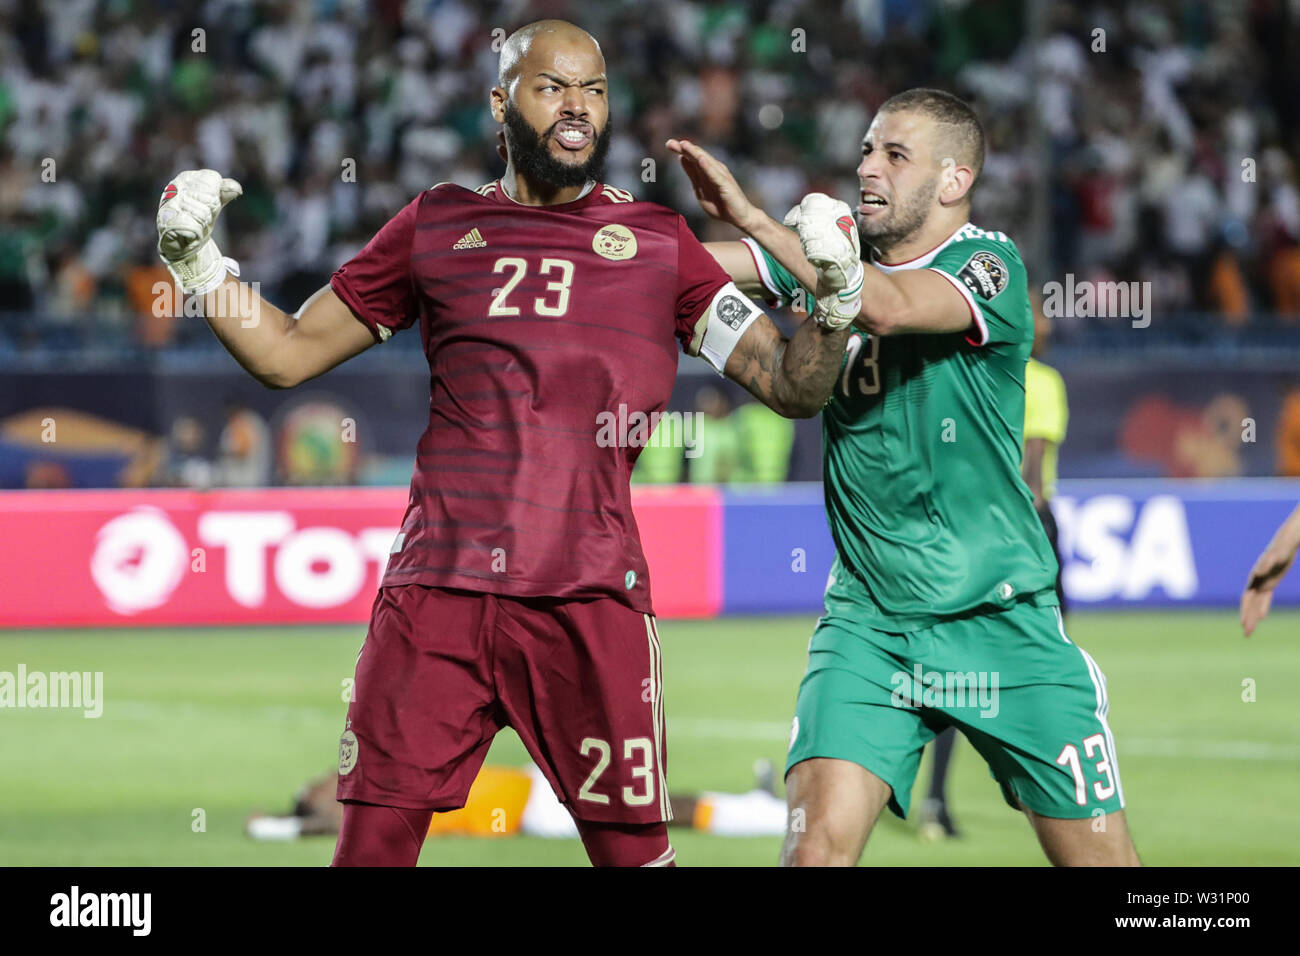 Suez, Egypt. 11th July, 2019. Algeria's Rais M'Bolhi (L) celebrates after the final whistle of the 2019 Africa Cup of Nations quarter final soccer match between Cote d'Ivoire and Algeria at the Suez Sports Stadium. Credit: Oliver Weiken/dpa/Alamy Live News Stock Photo